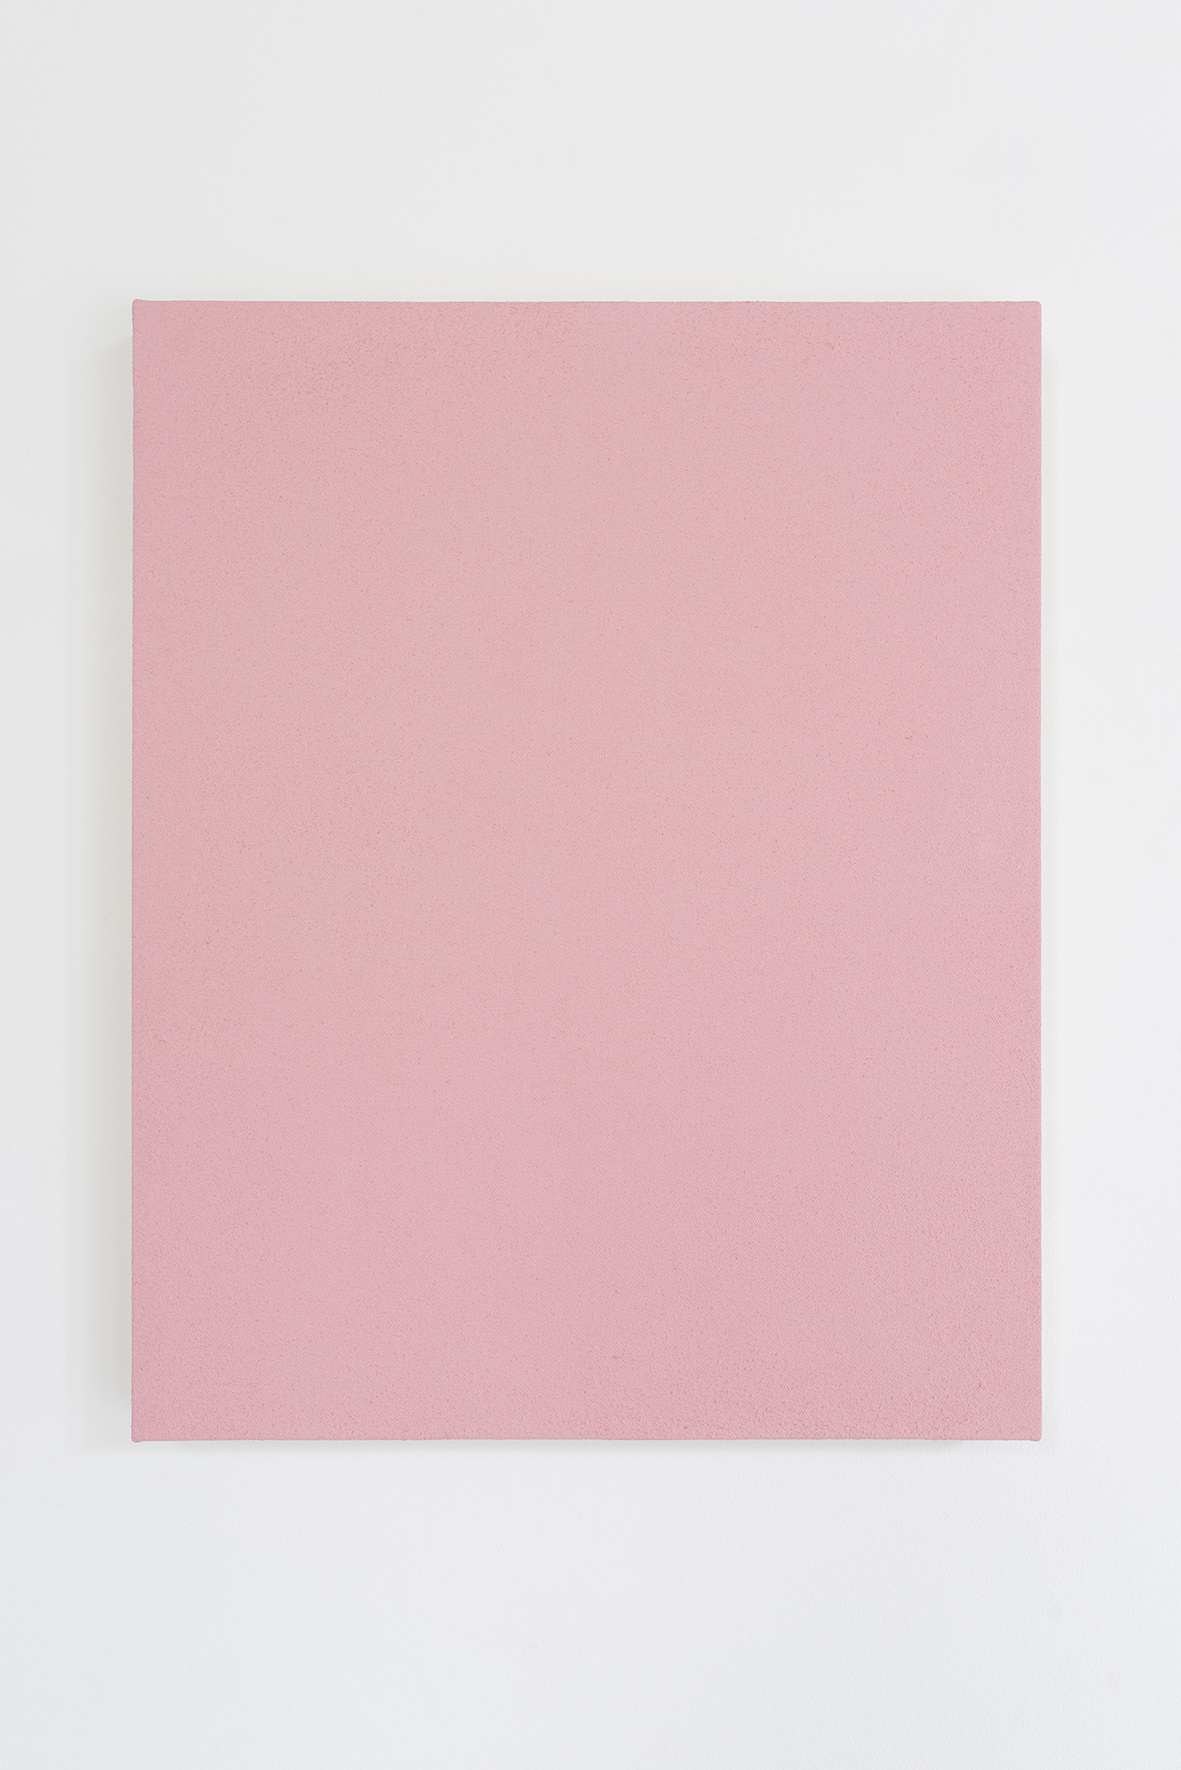 Untitled (pink)